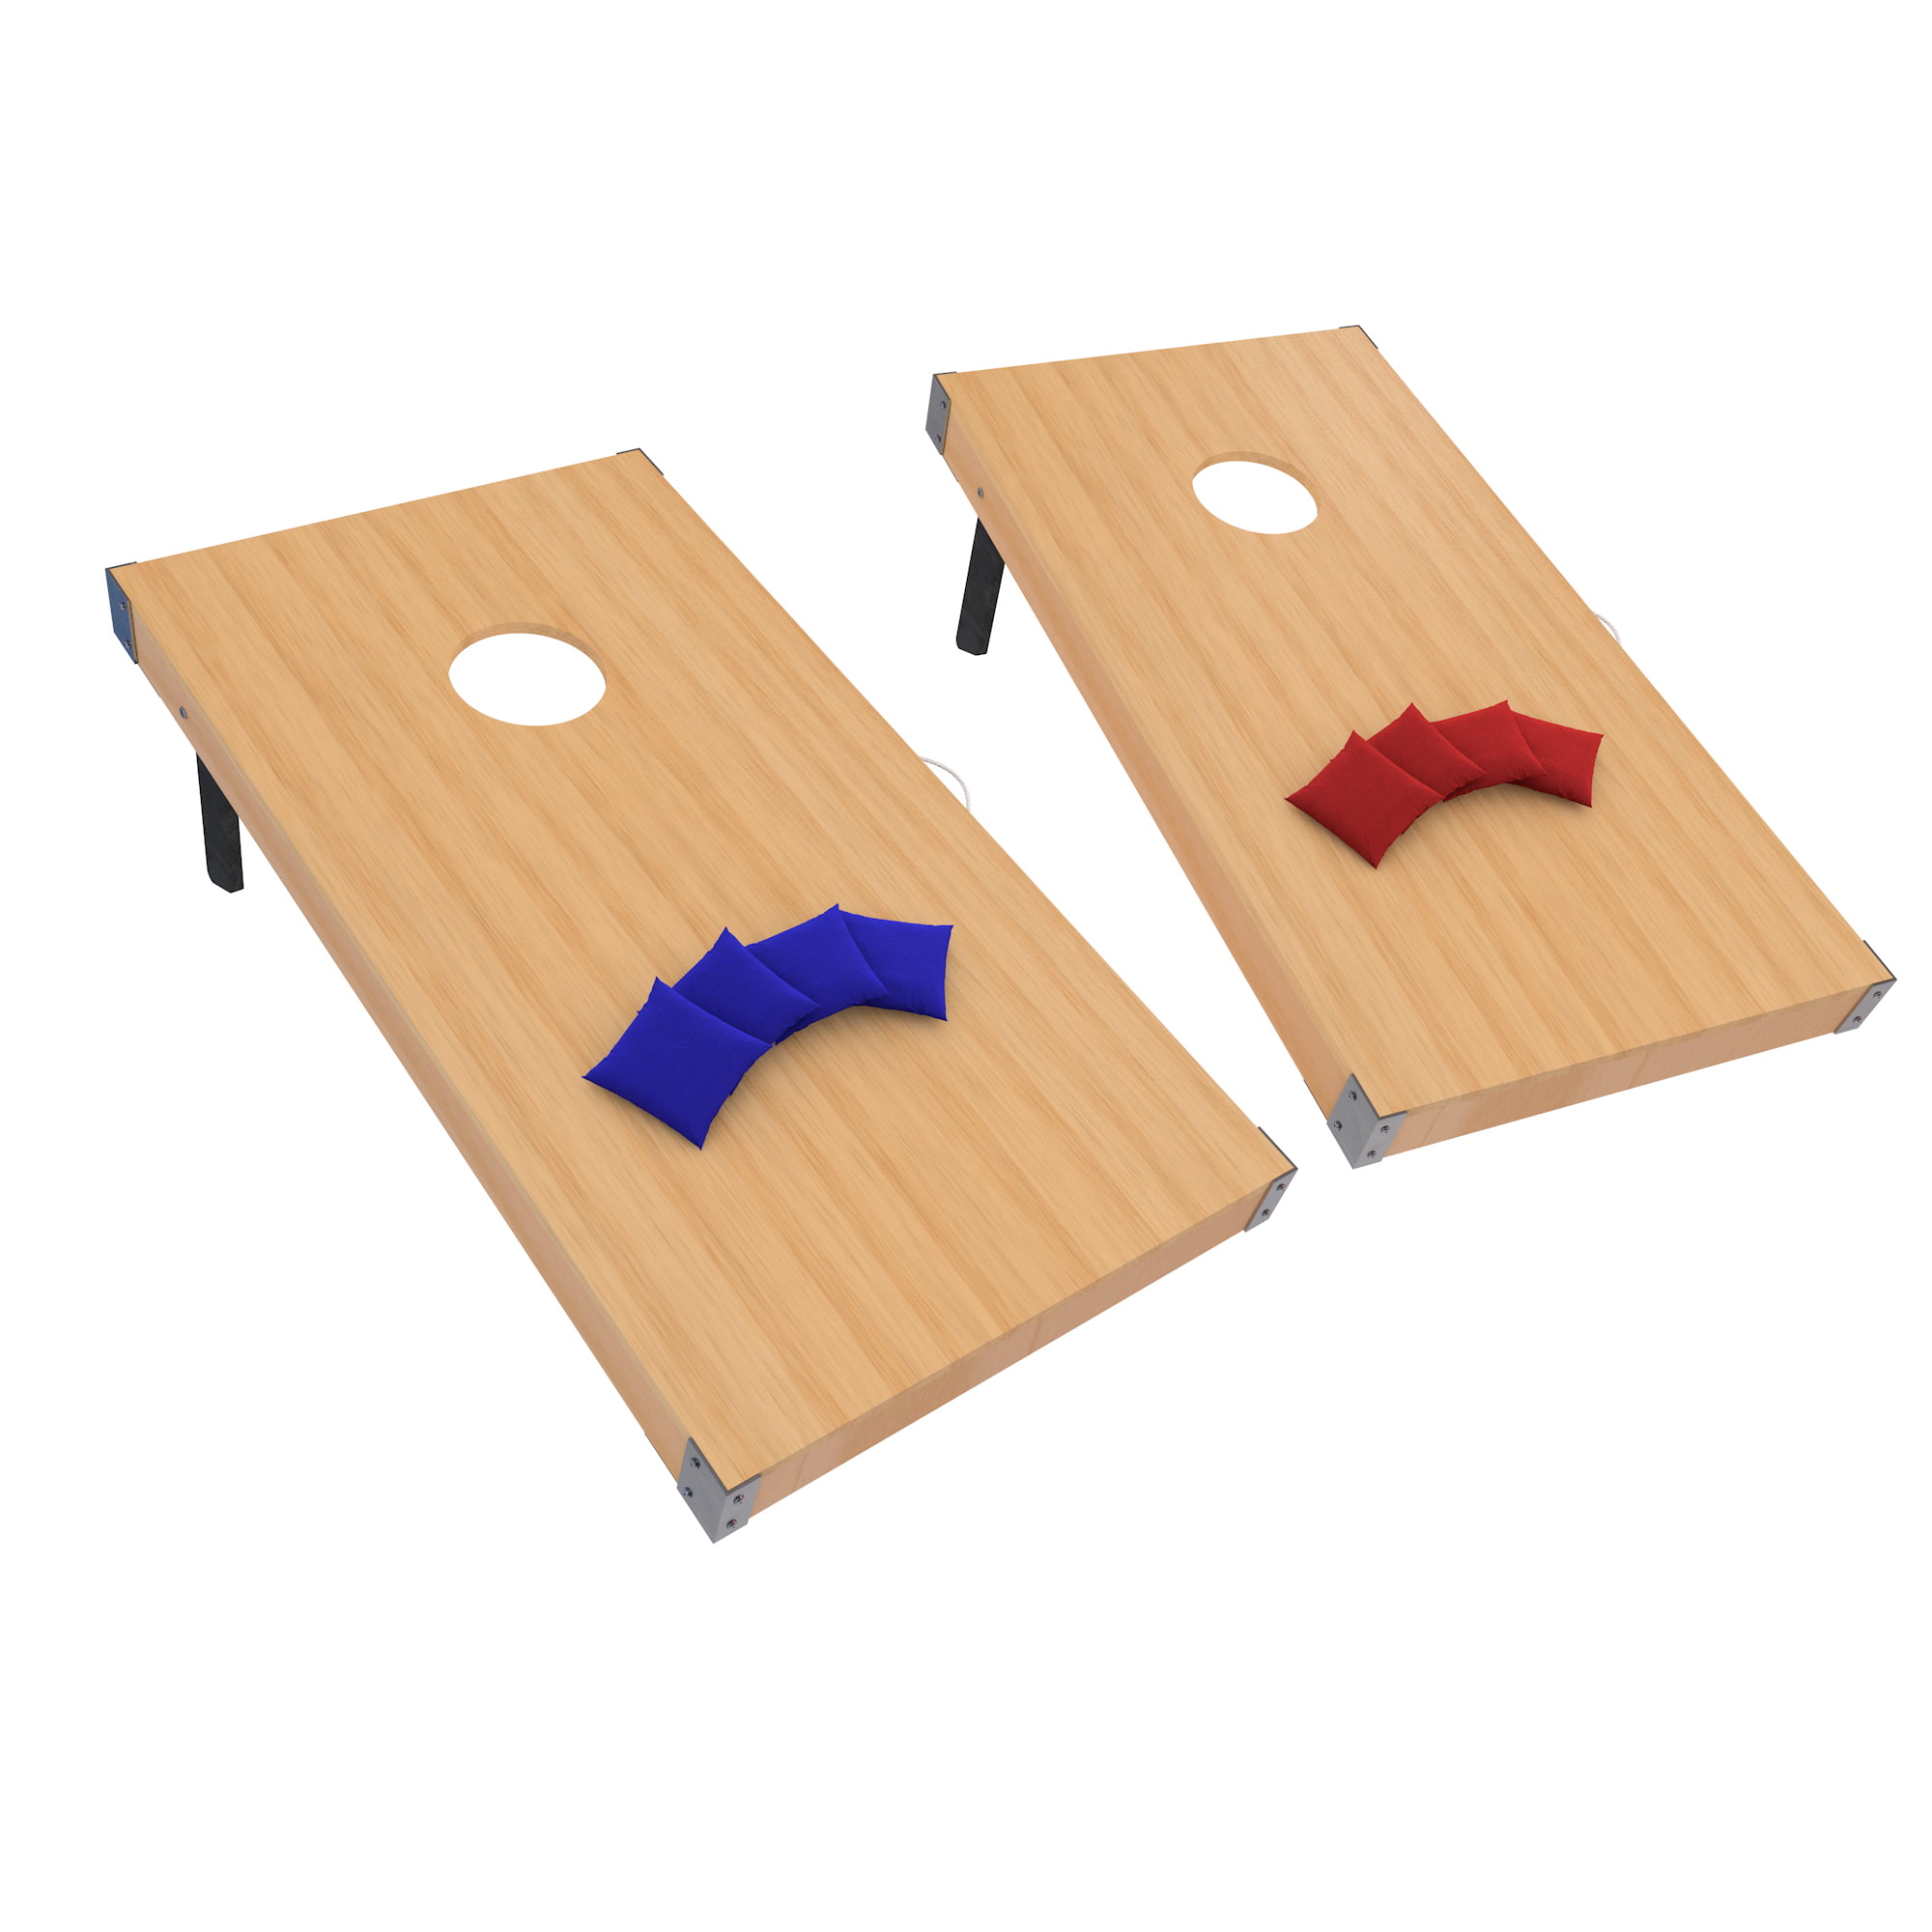 Outdoor Wooden Cornhole Board Set Corn Hole Boards Game Toy with Foldable Leg 